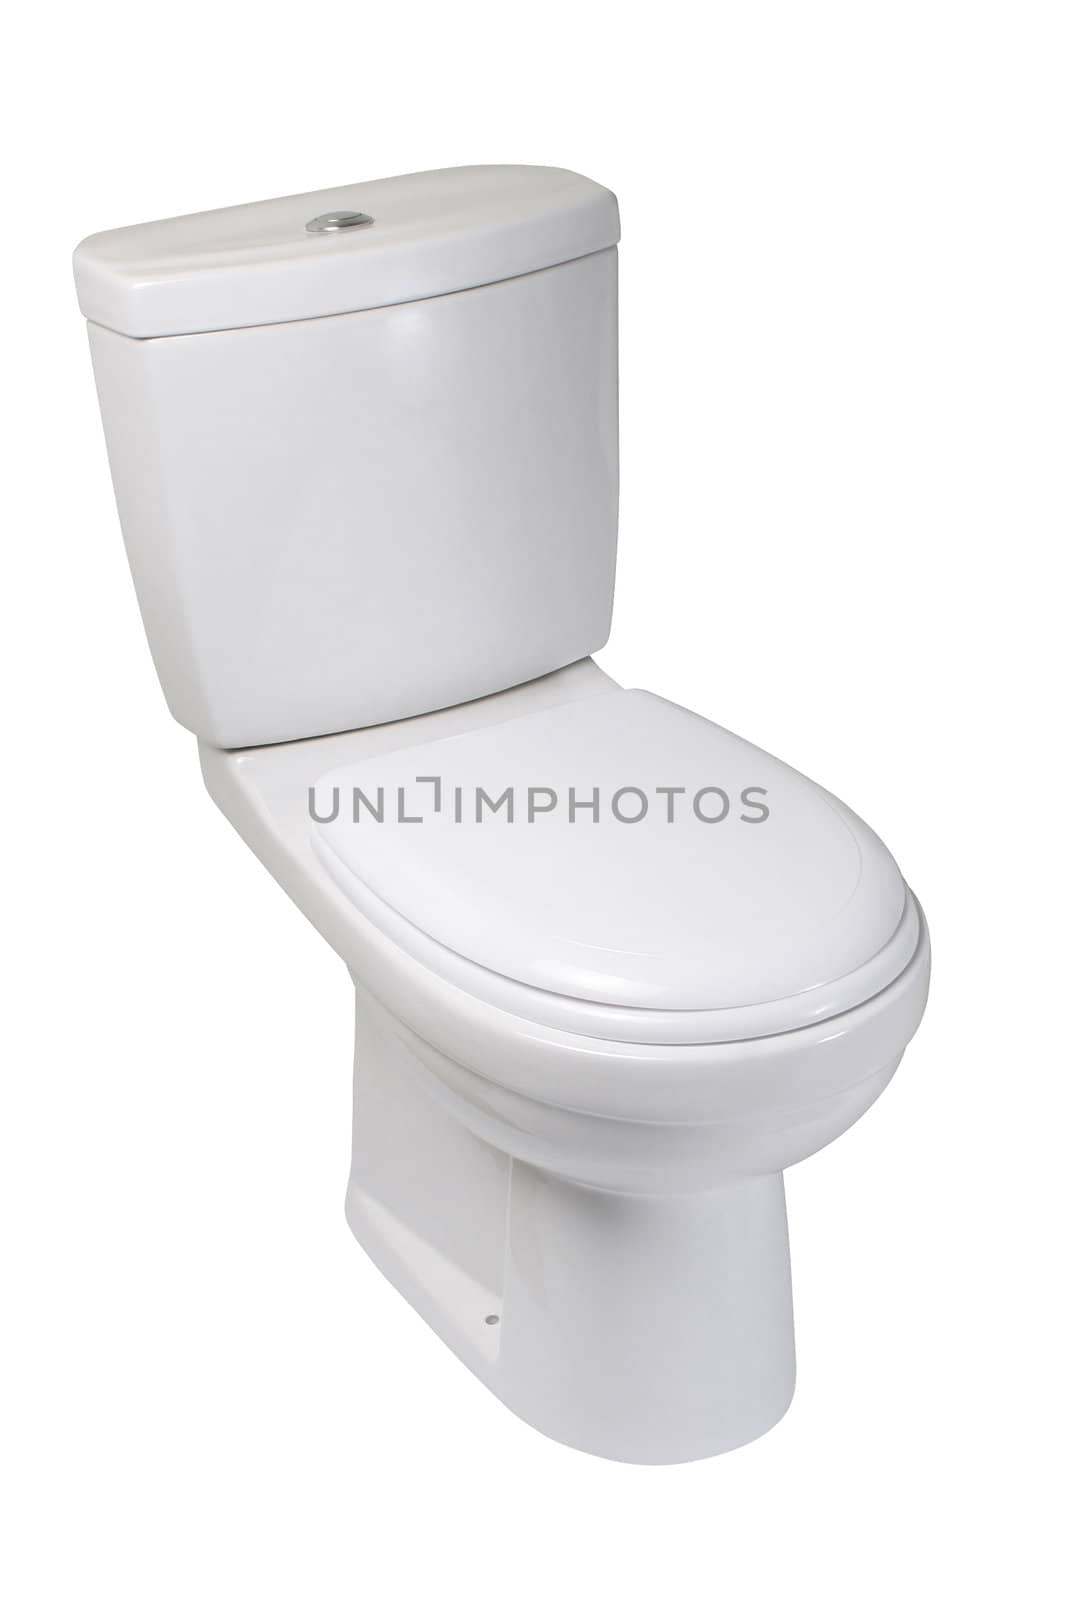 Toilet bowl, isolated on white. File includes clipping path for easy background removing